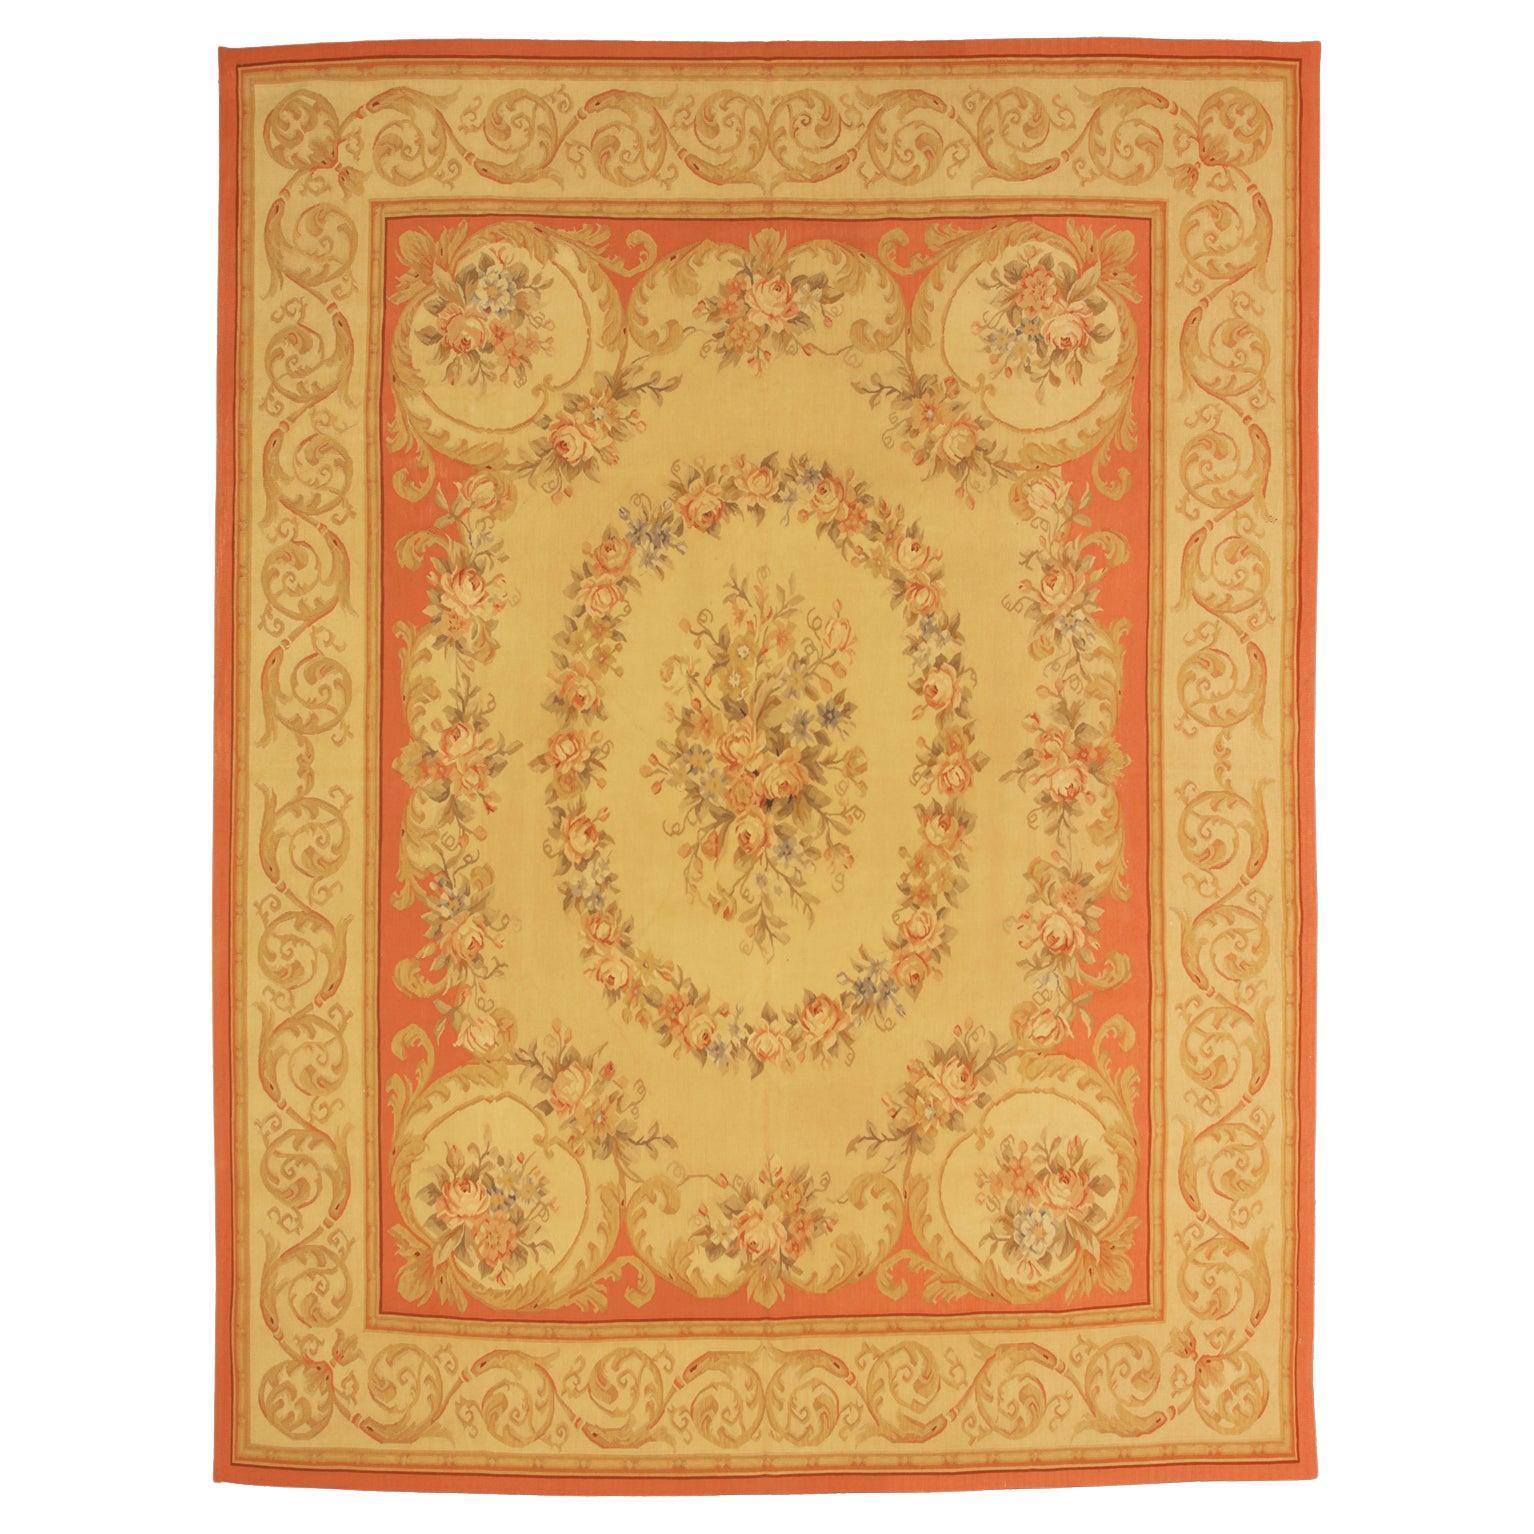 French Style Aubusson Flat-Weave Rug Floral Design with Medallion, 21st Century